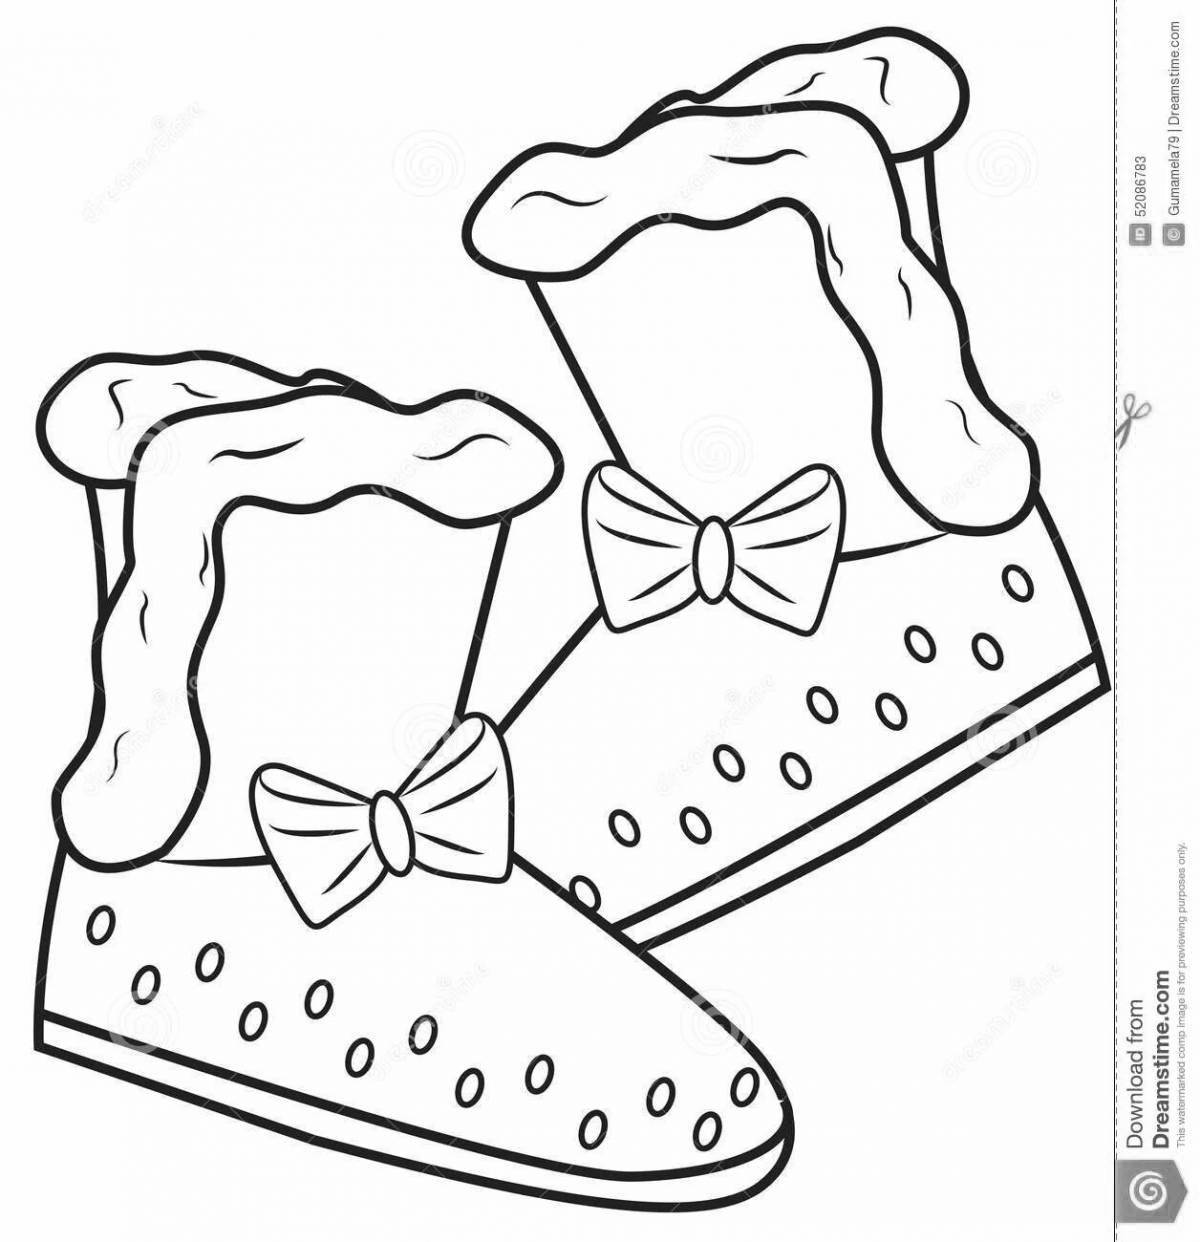 Fine winter boots coloring page